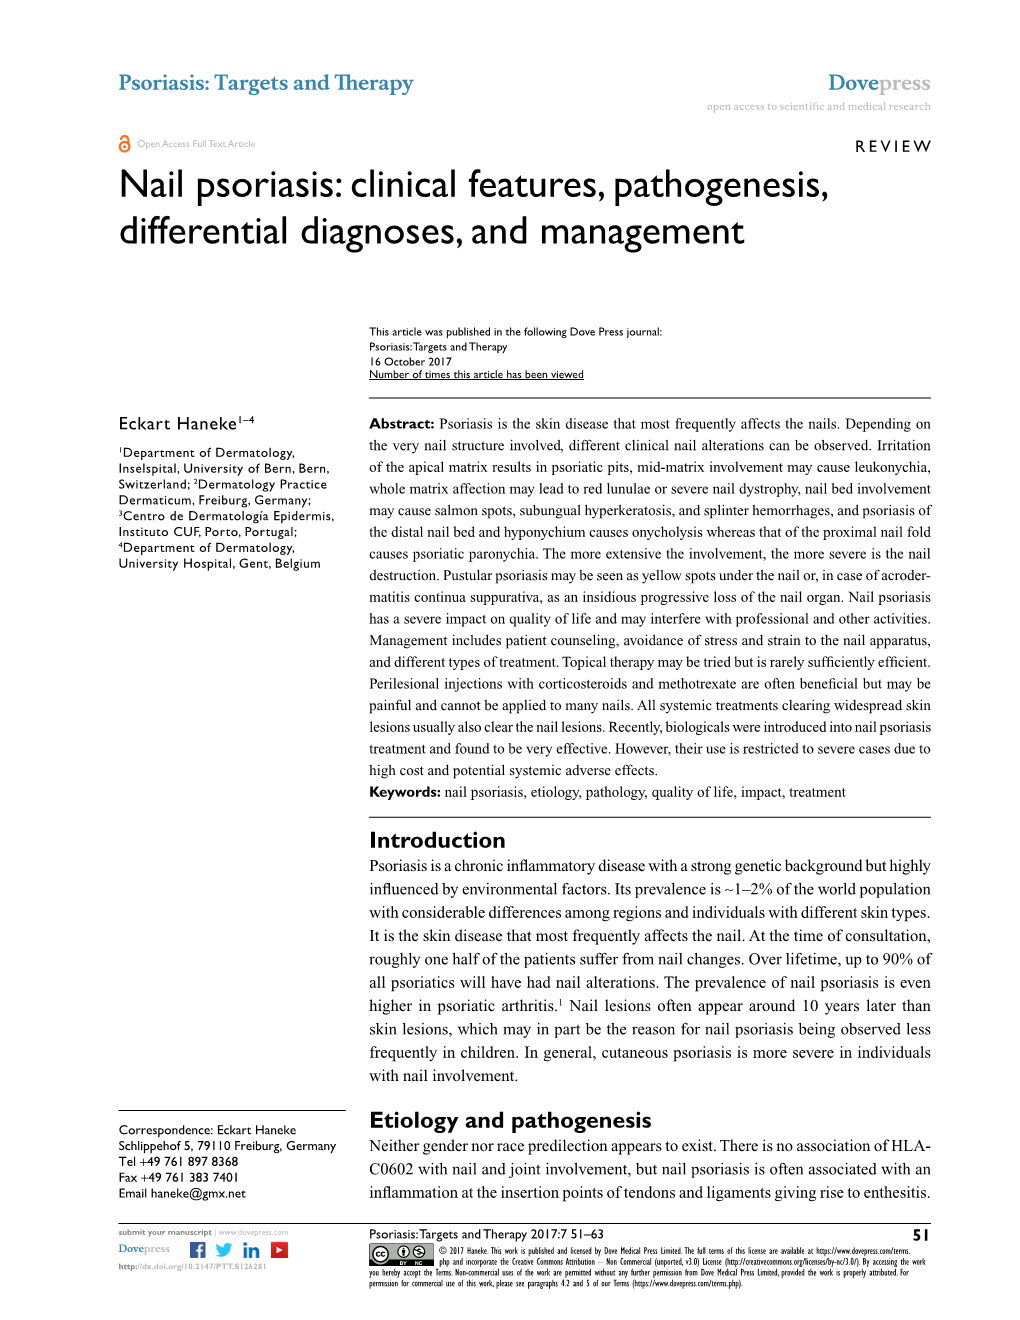 Nail Psoriasis: Clinical Features, Pathogenesis, Differential Diagnoses, and Management